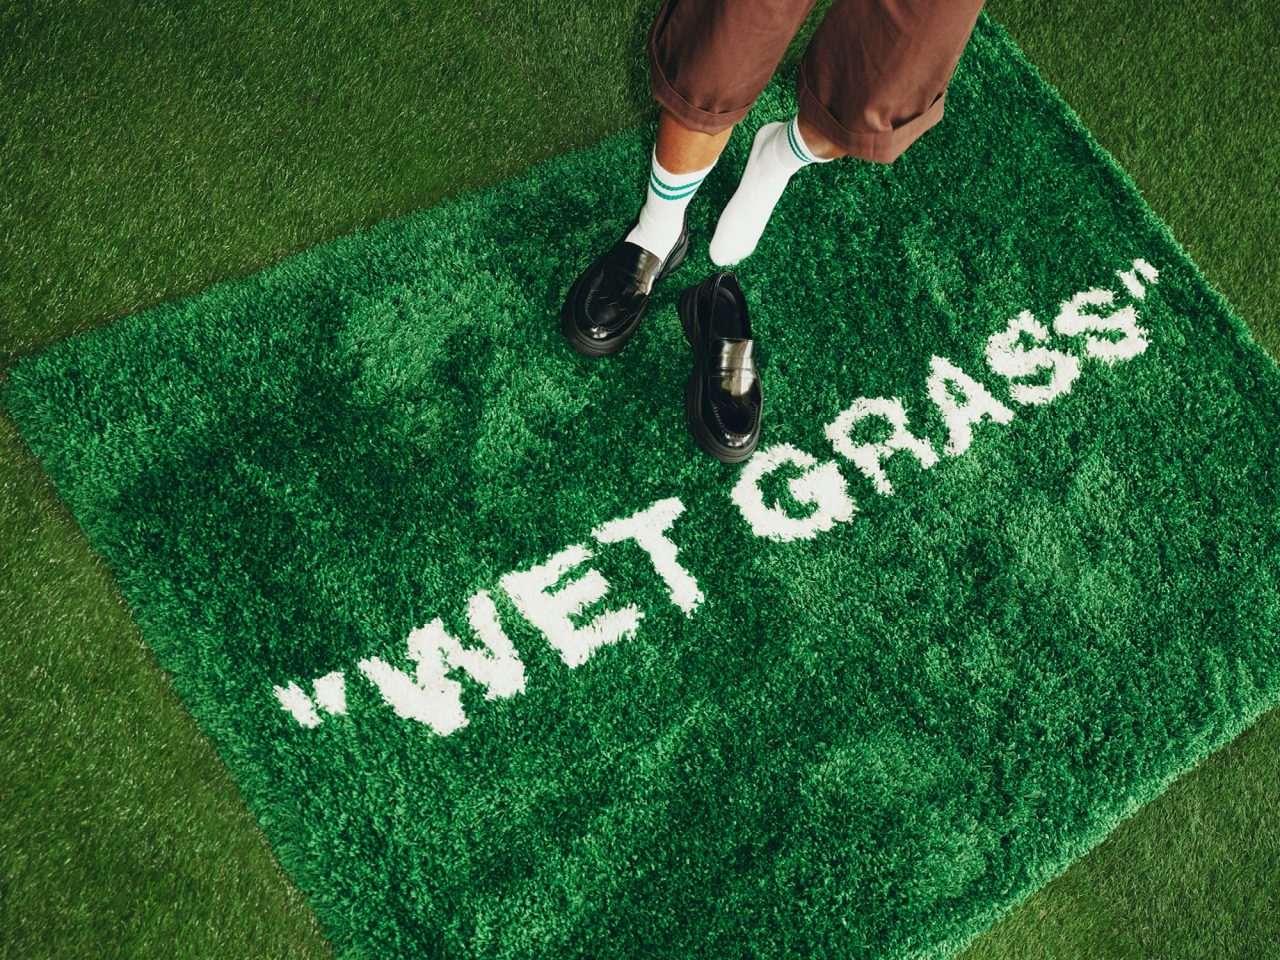 Person in shorts, white knee socks and black shoes standing on a green rya rug with the white text: WET GRASS.